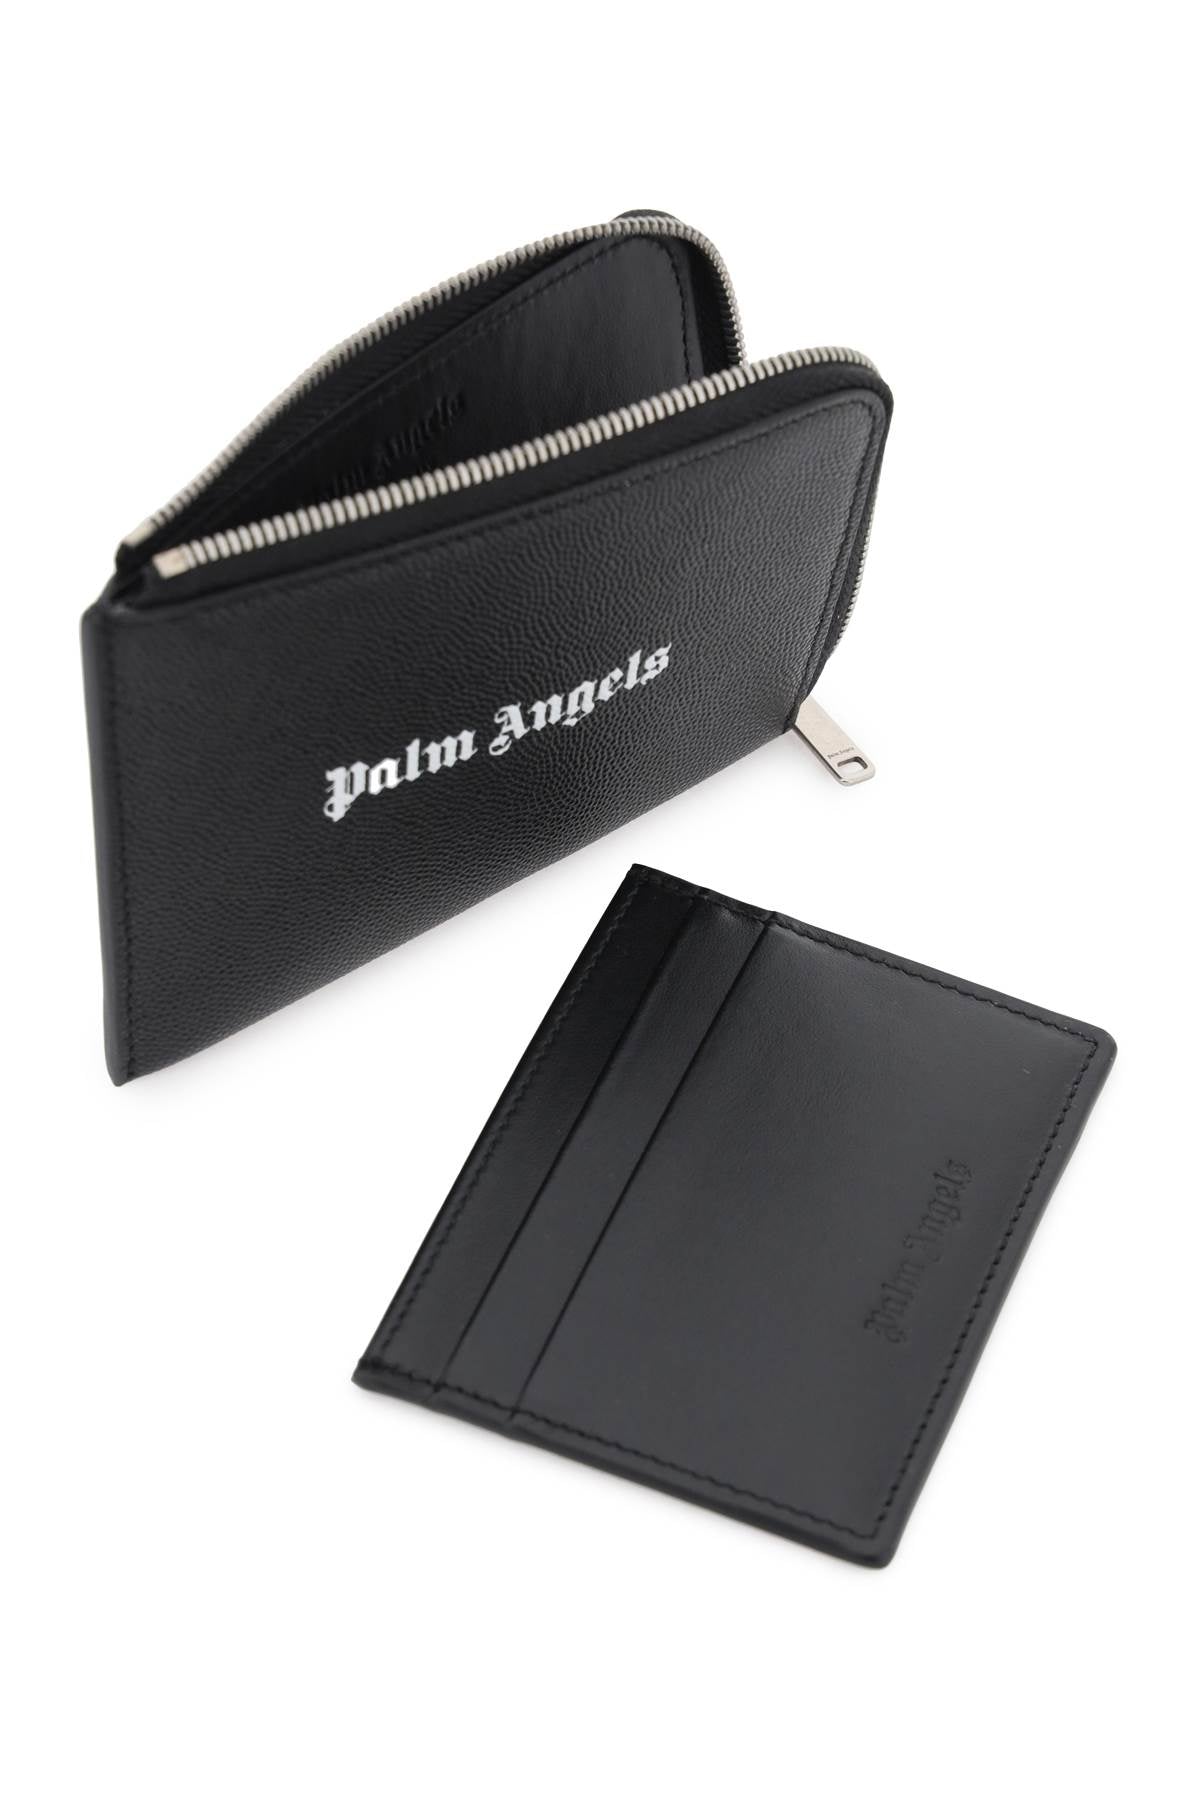 Palm Angels Palm angels mini pouch with pull-out cardholder